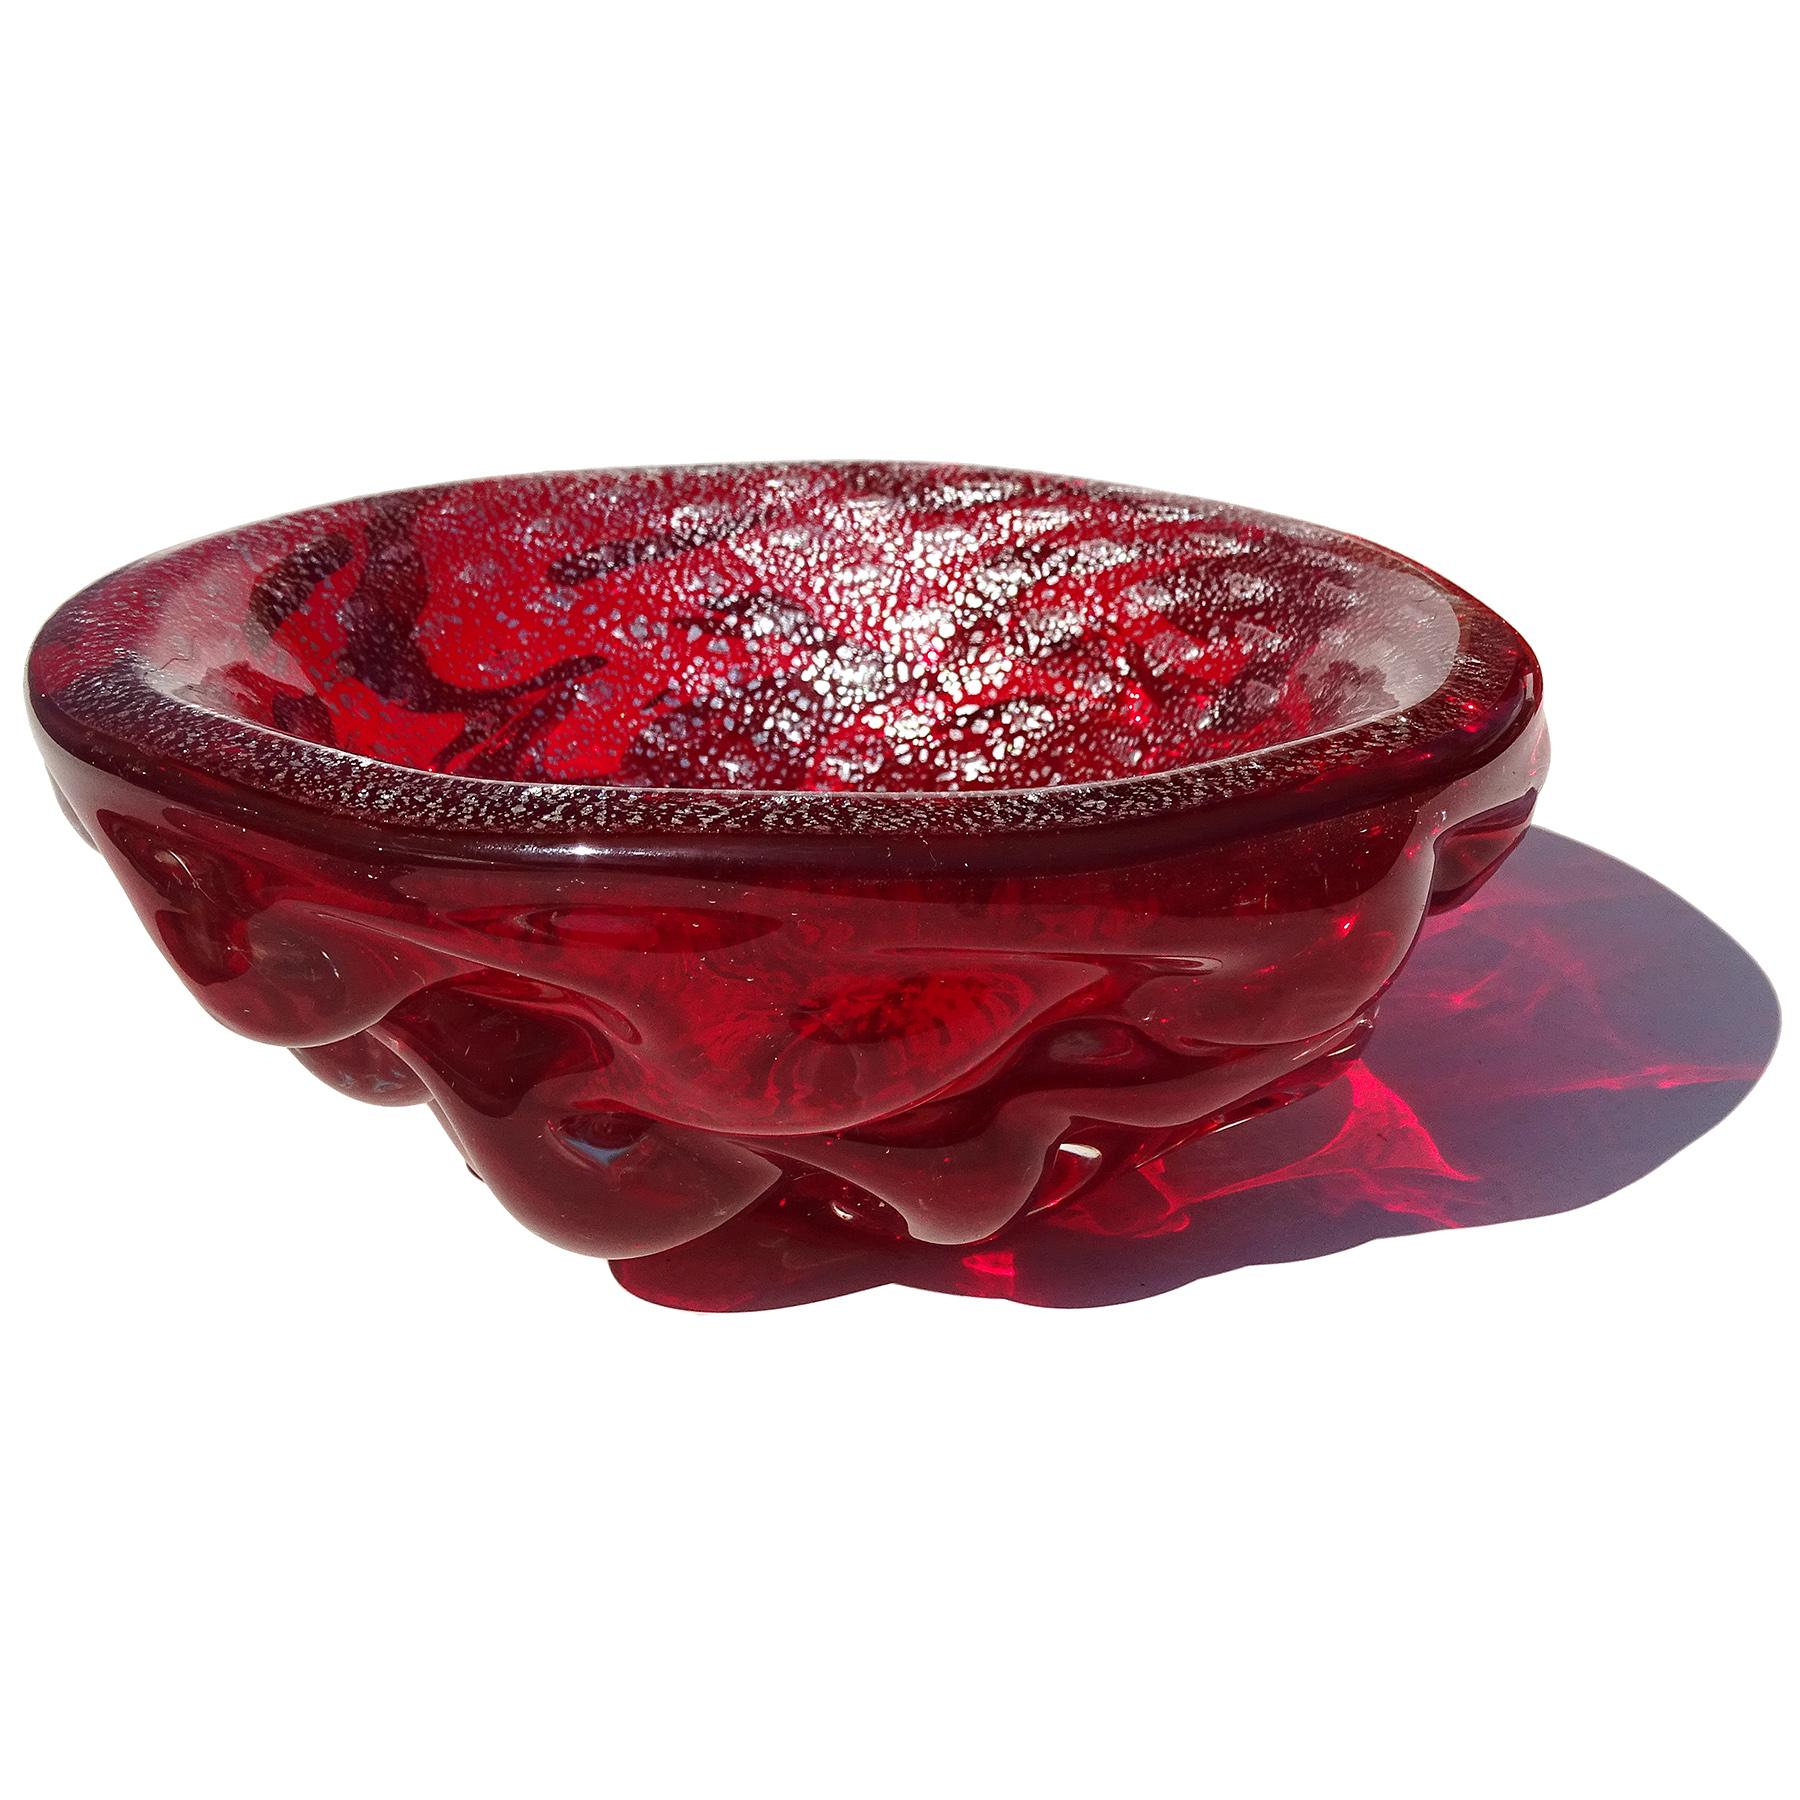 A.Ve.M. Radi Murano Red Silver Fleck Italian Art Glass Sculptural Surface Bowl In Good Condition For Sale In Kissimmee, FL